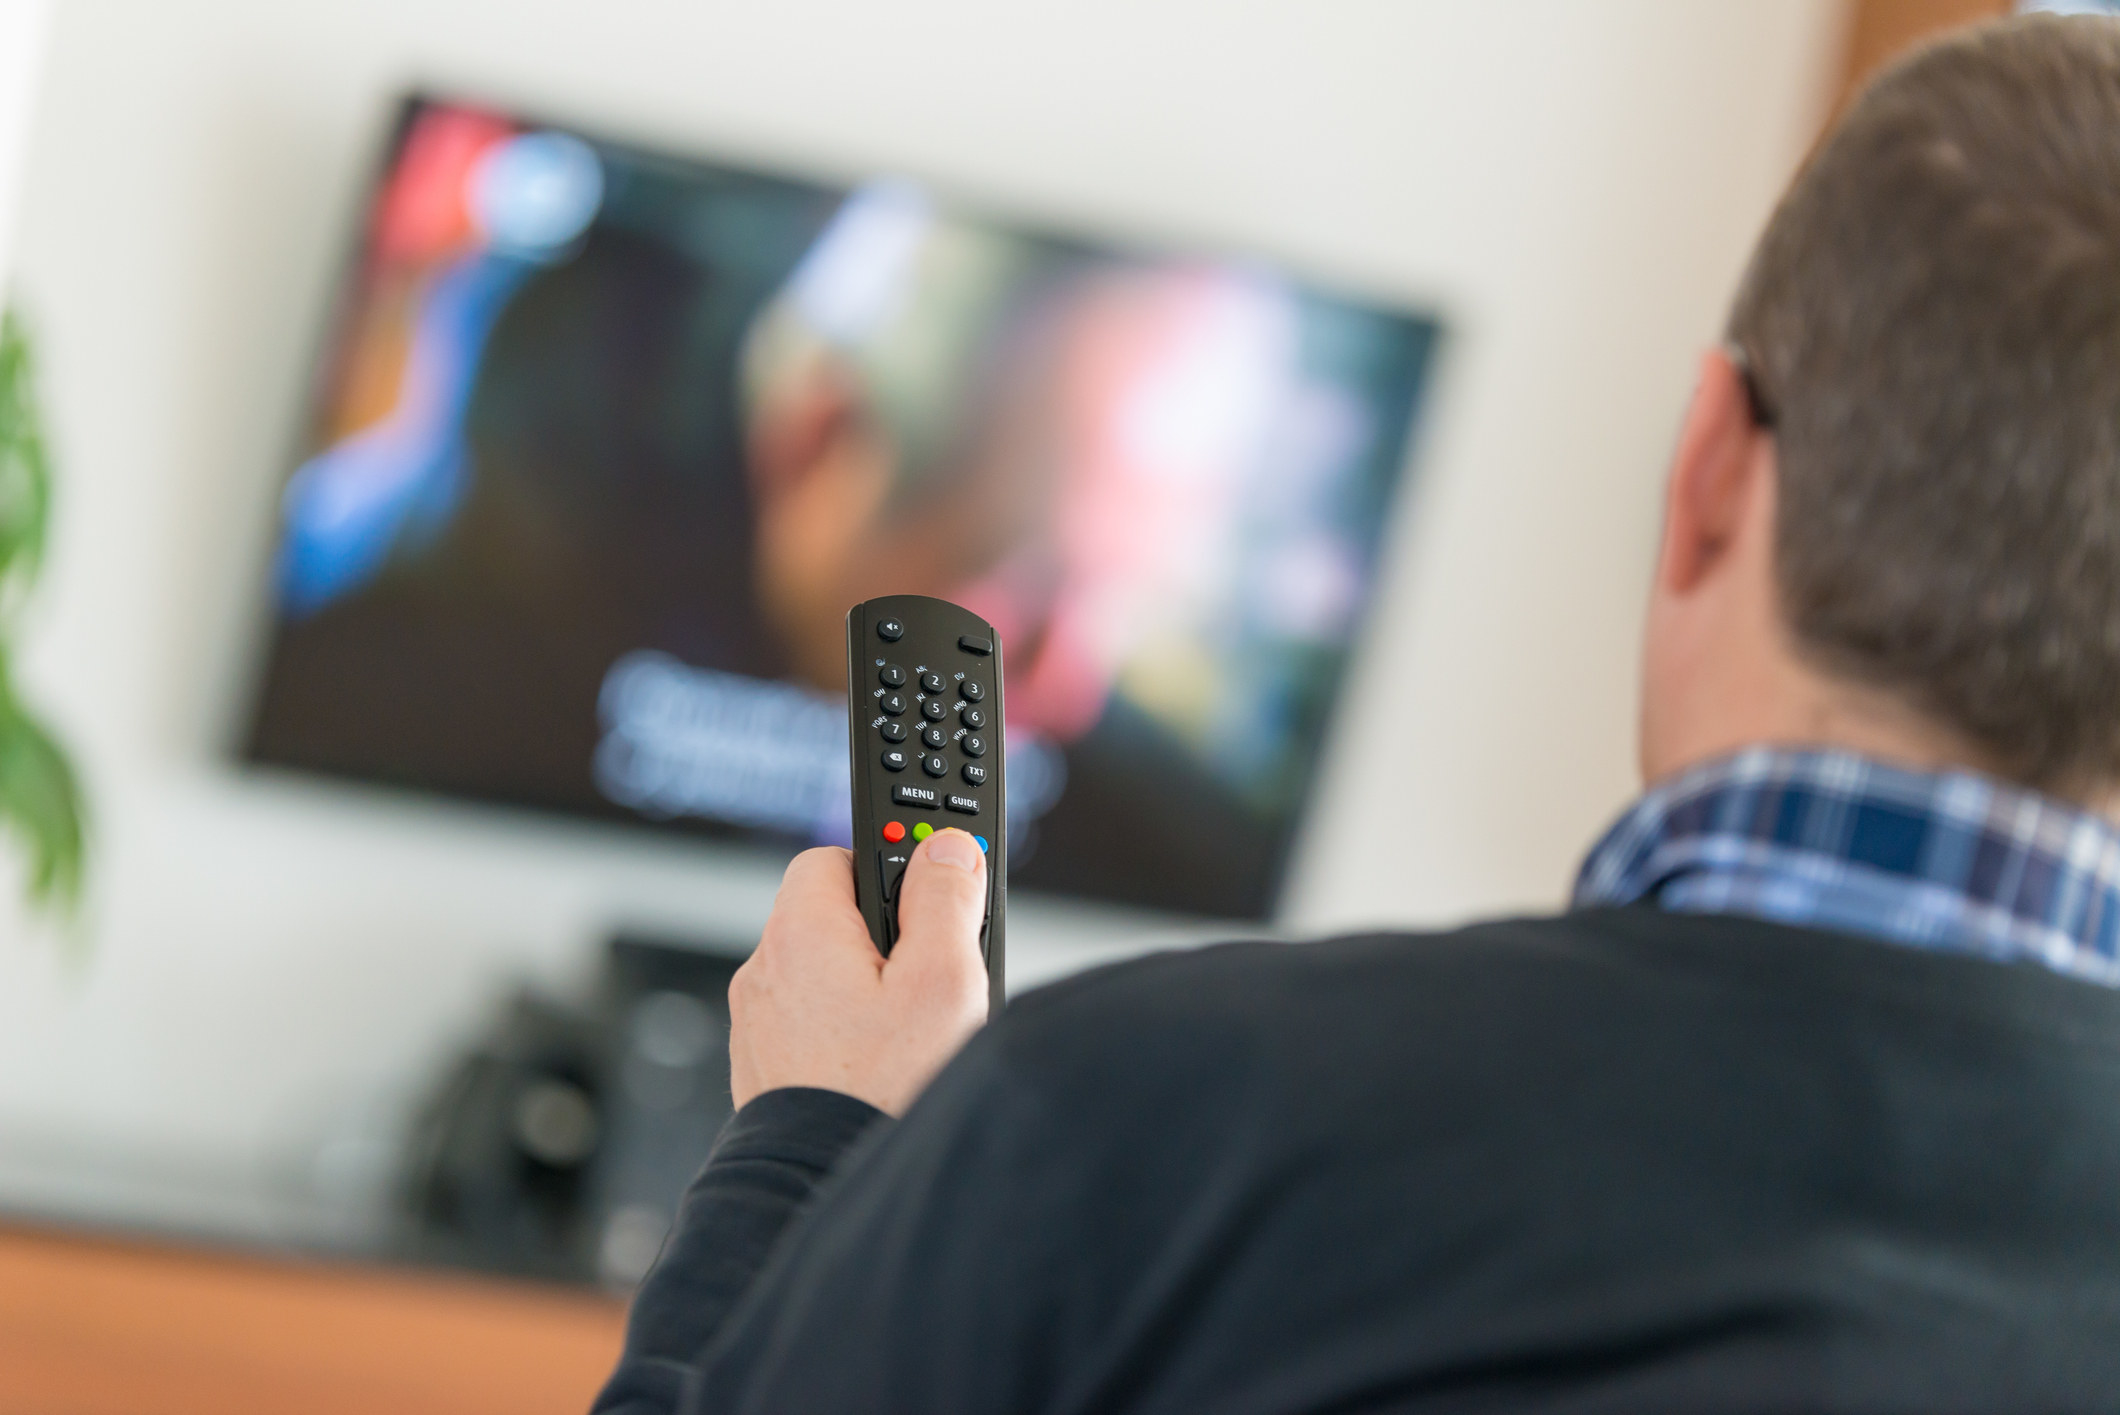 A man using a television remote control